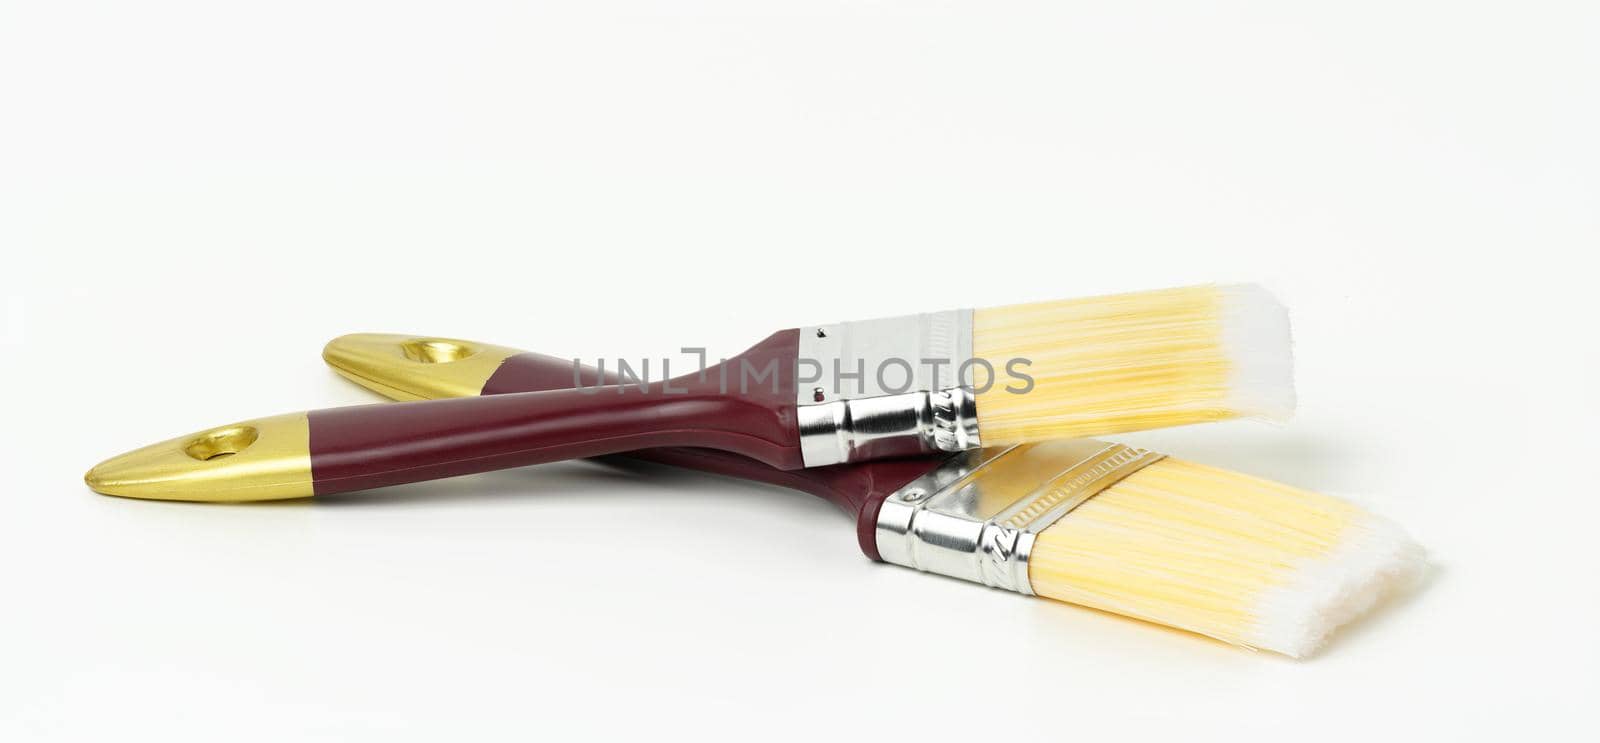 soft paint brush on wooden handle on white background